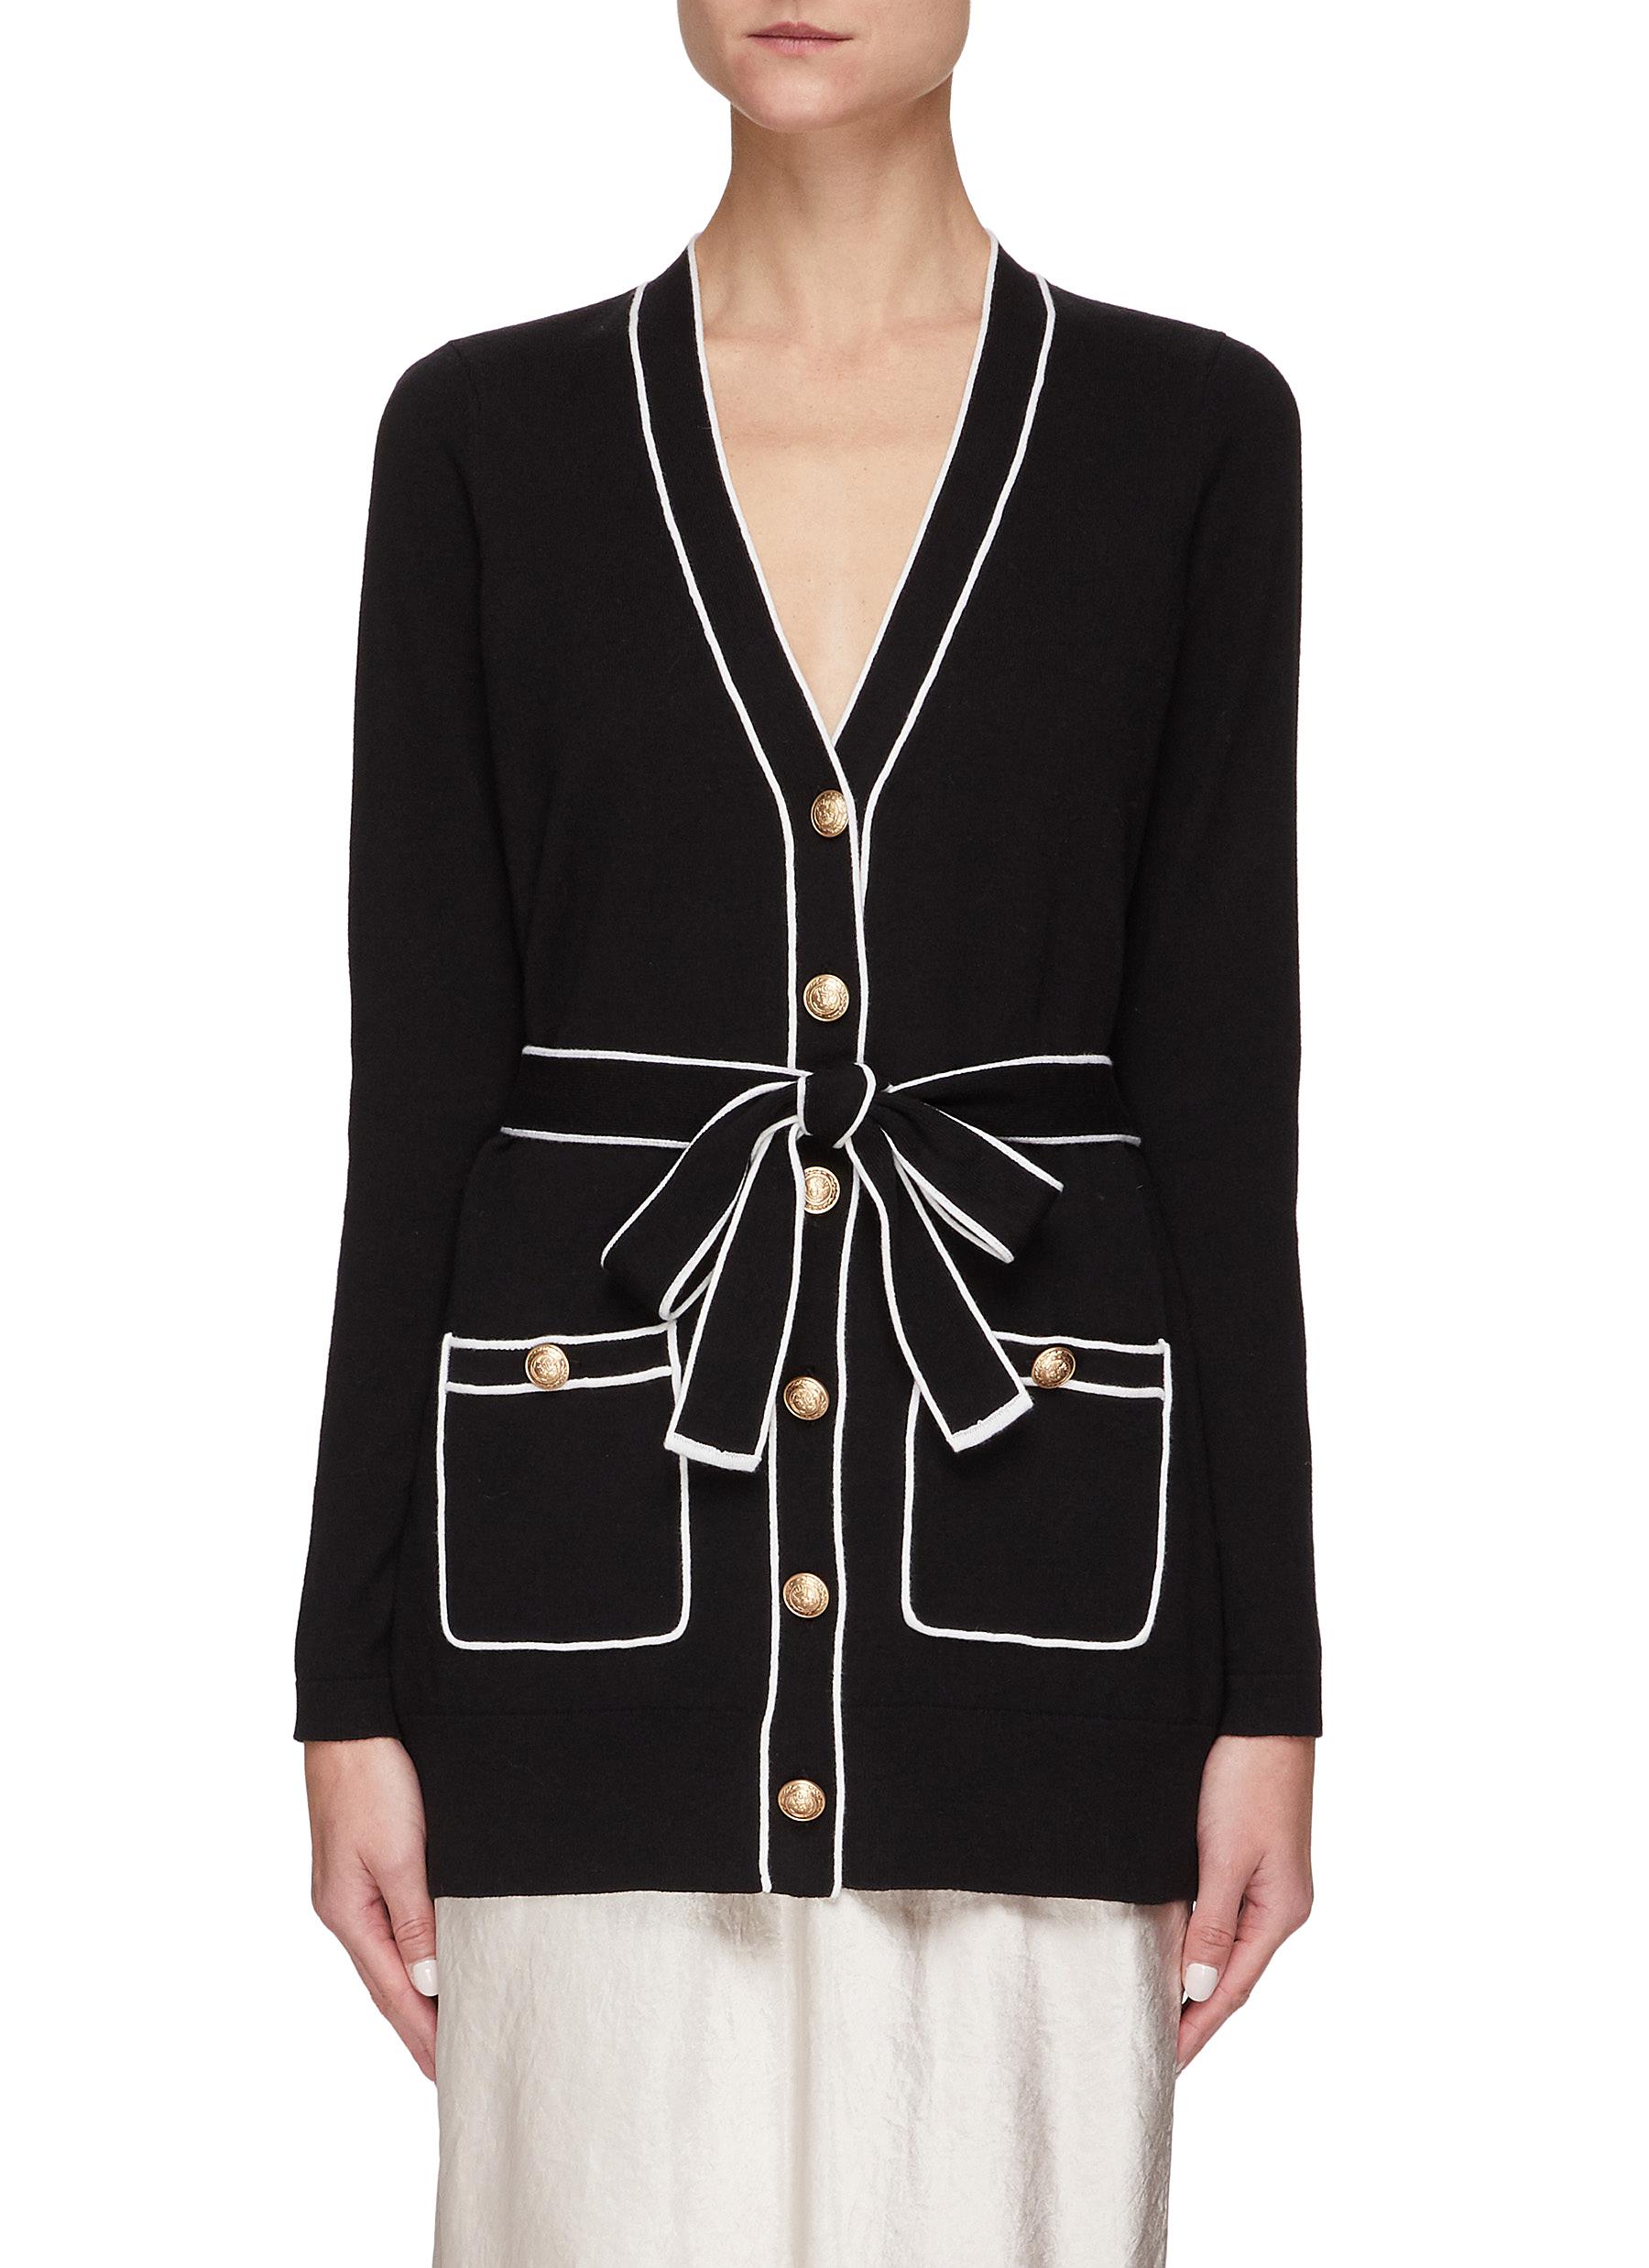 L'AGENCE 'Ronny' Belted Piped Merino Wool Cardigan